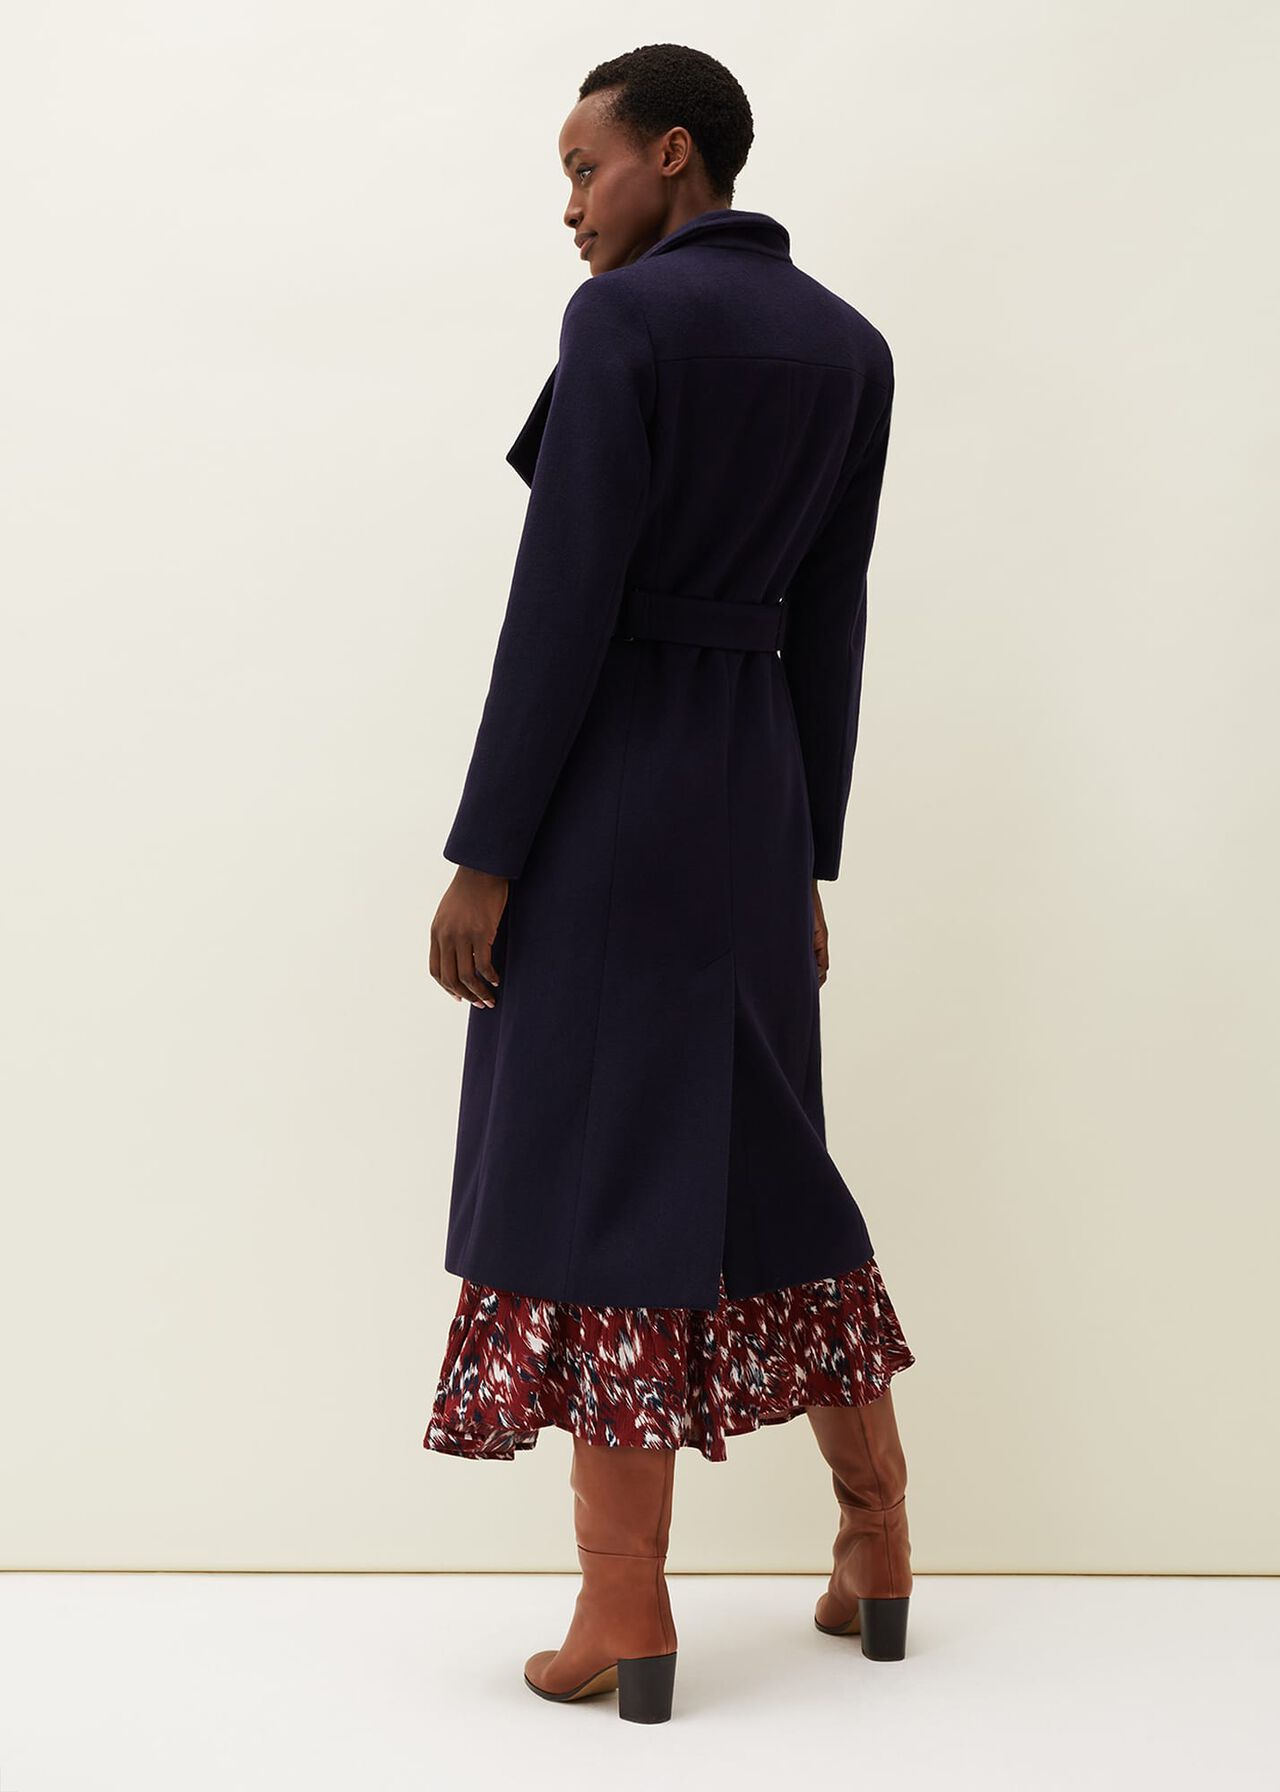 Thea Wool Trench